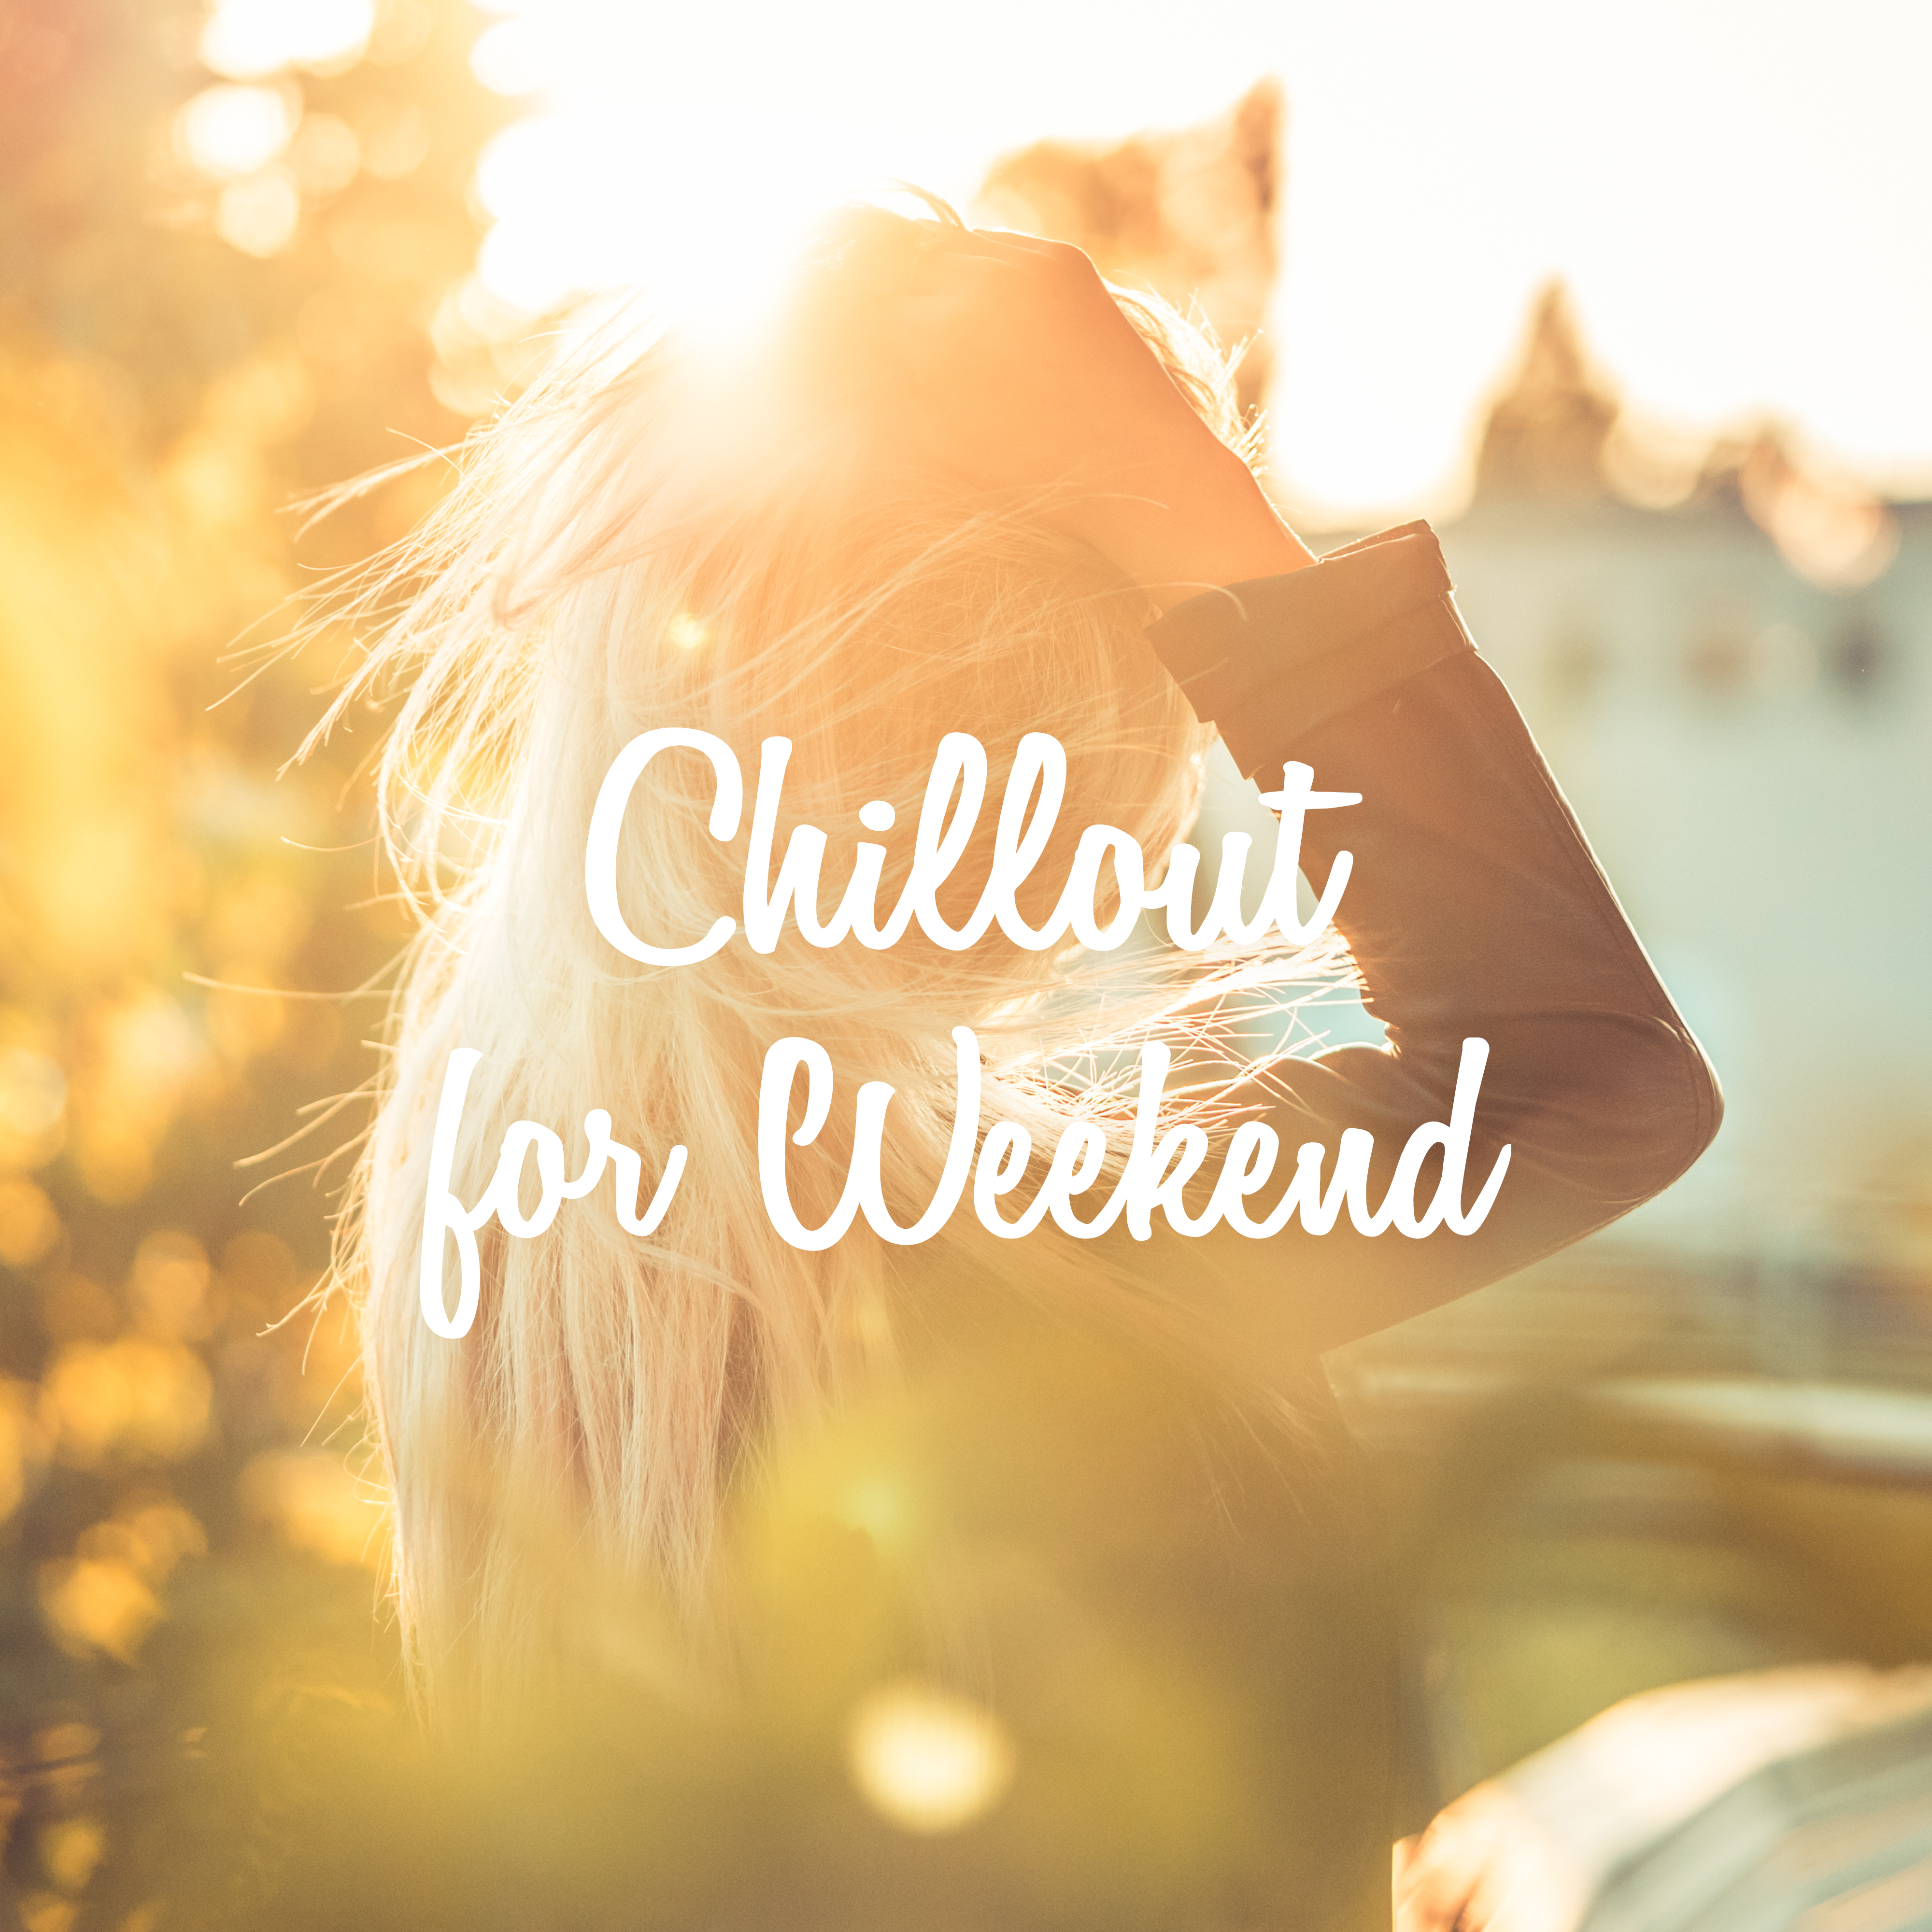 Chillout for Weekend  Fresh Chillout Beats, Electronic Music, Chill Out 2017, Relax, Summer, Lounge